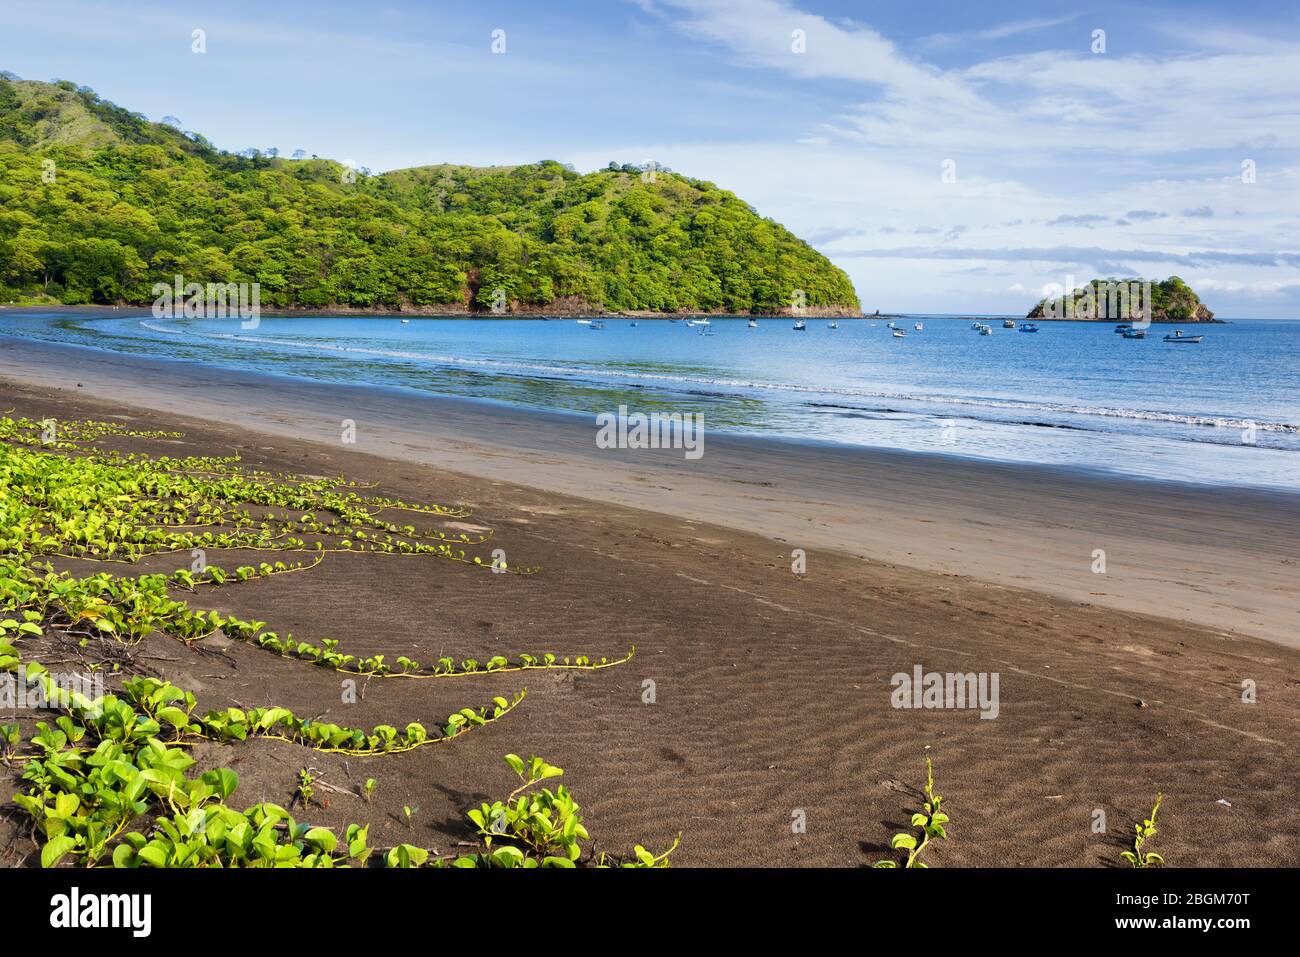 View of a volcanic beach on the pacific coast of central America. Playas del Coco, Costa Rica. Guanacaste province. Stock Photo